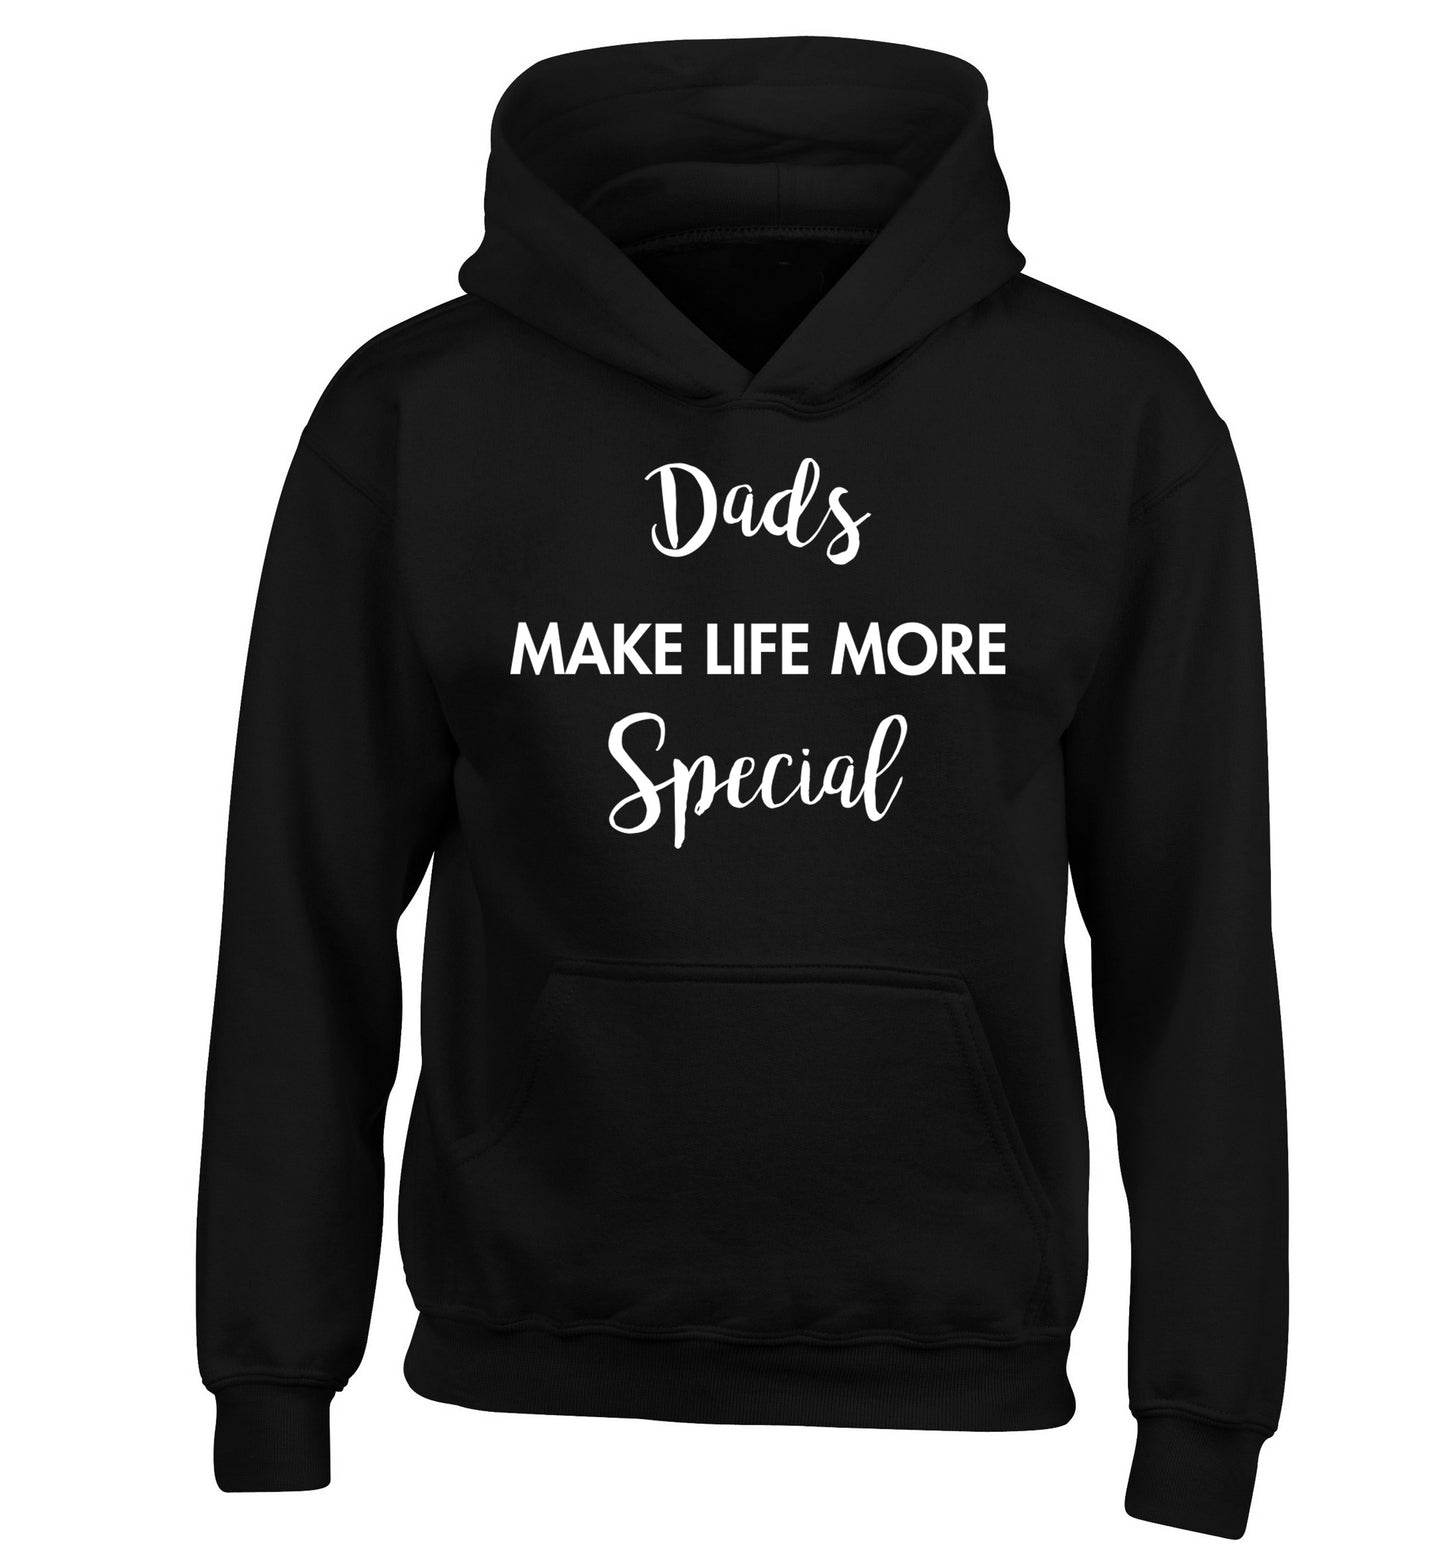 Dads make life more special children's black hoodie 12-14 Years